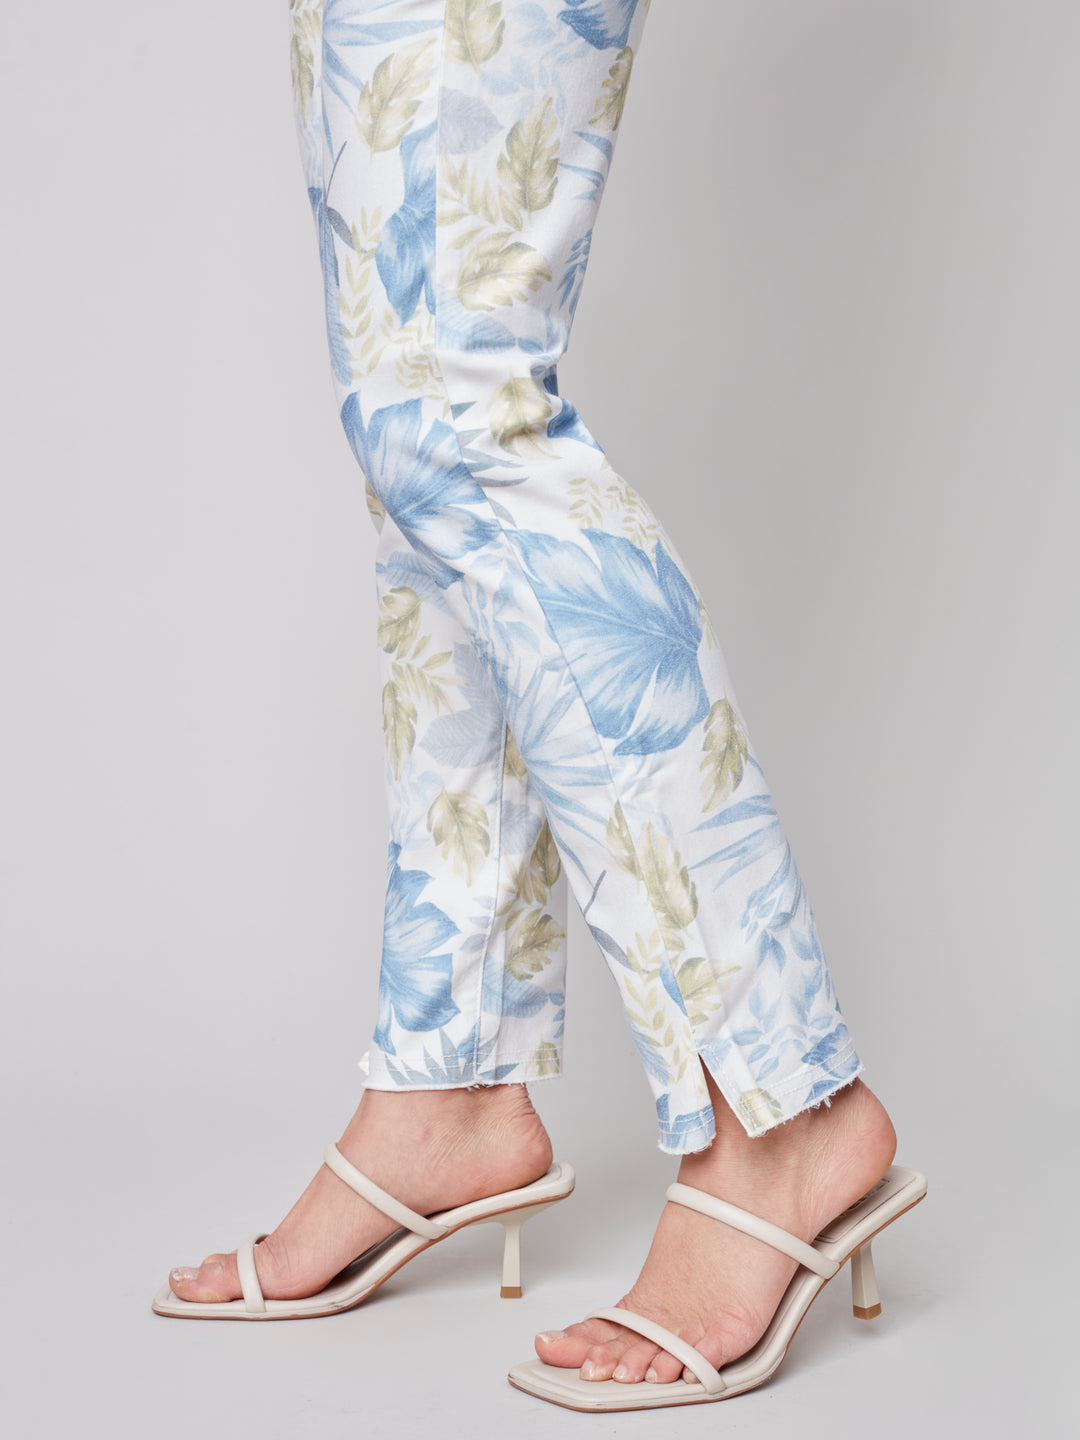 Print Twill Ankle Pant - C5139